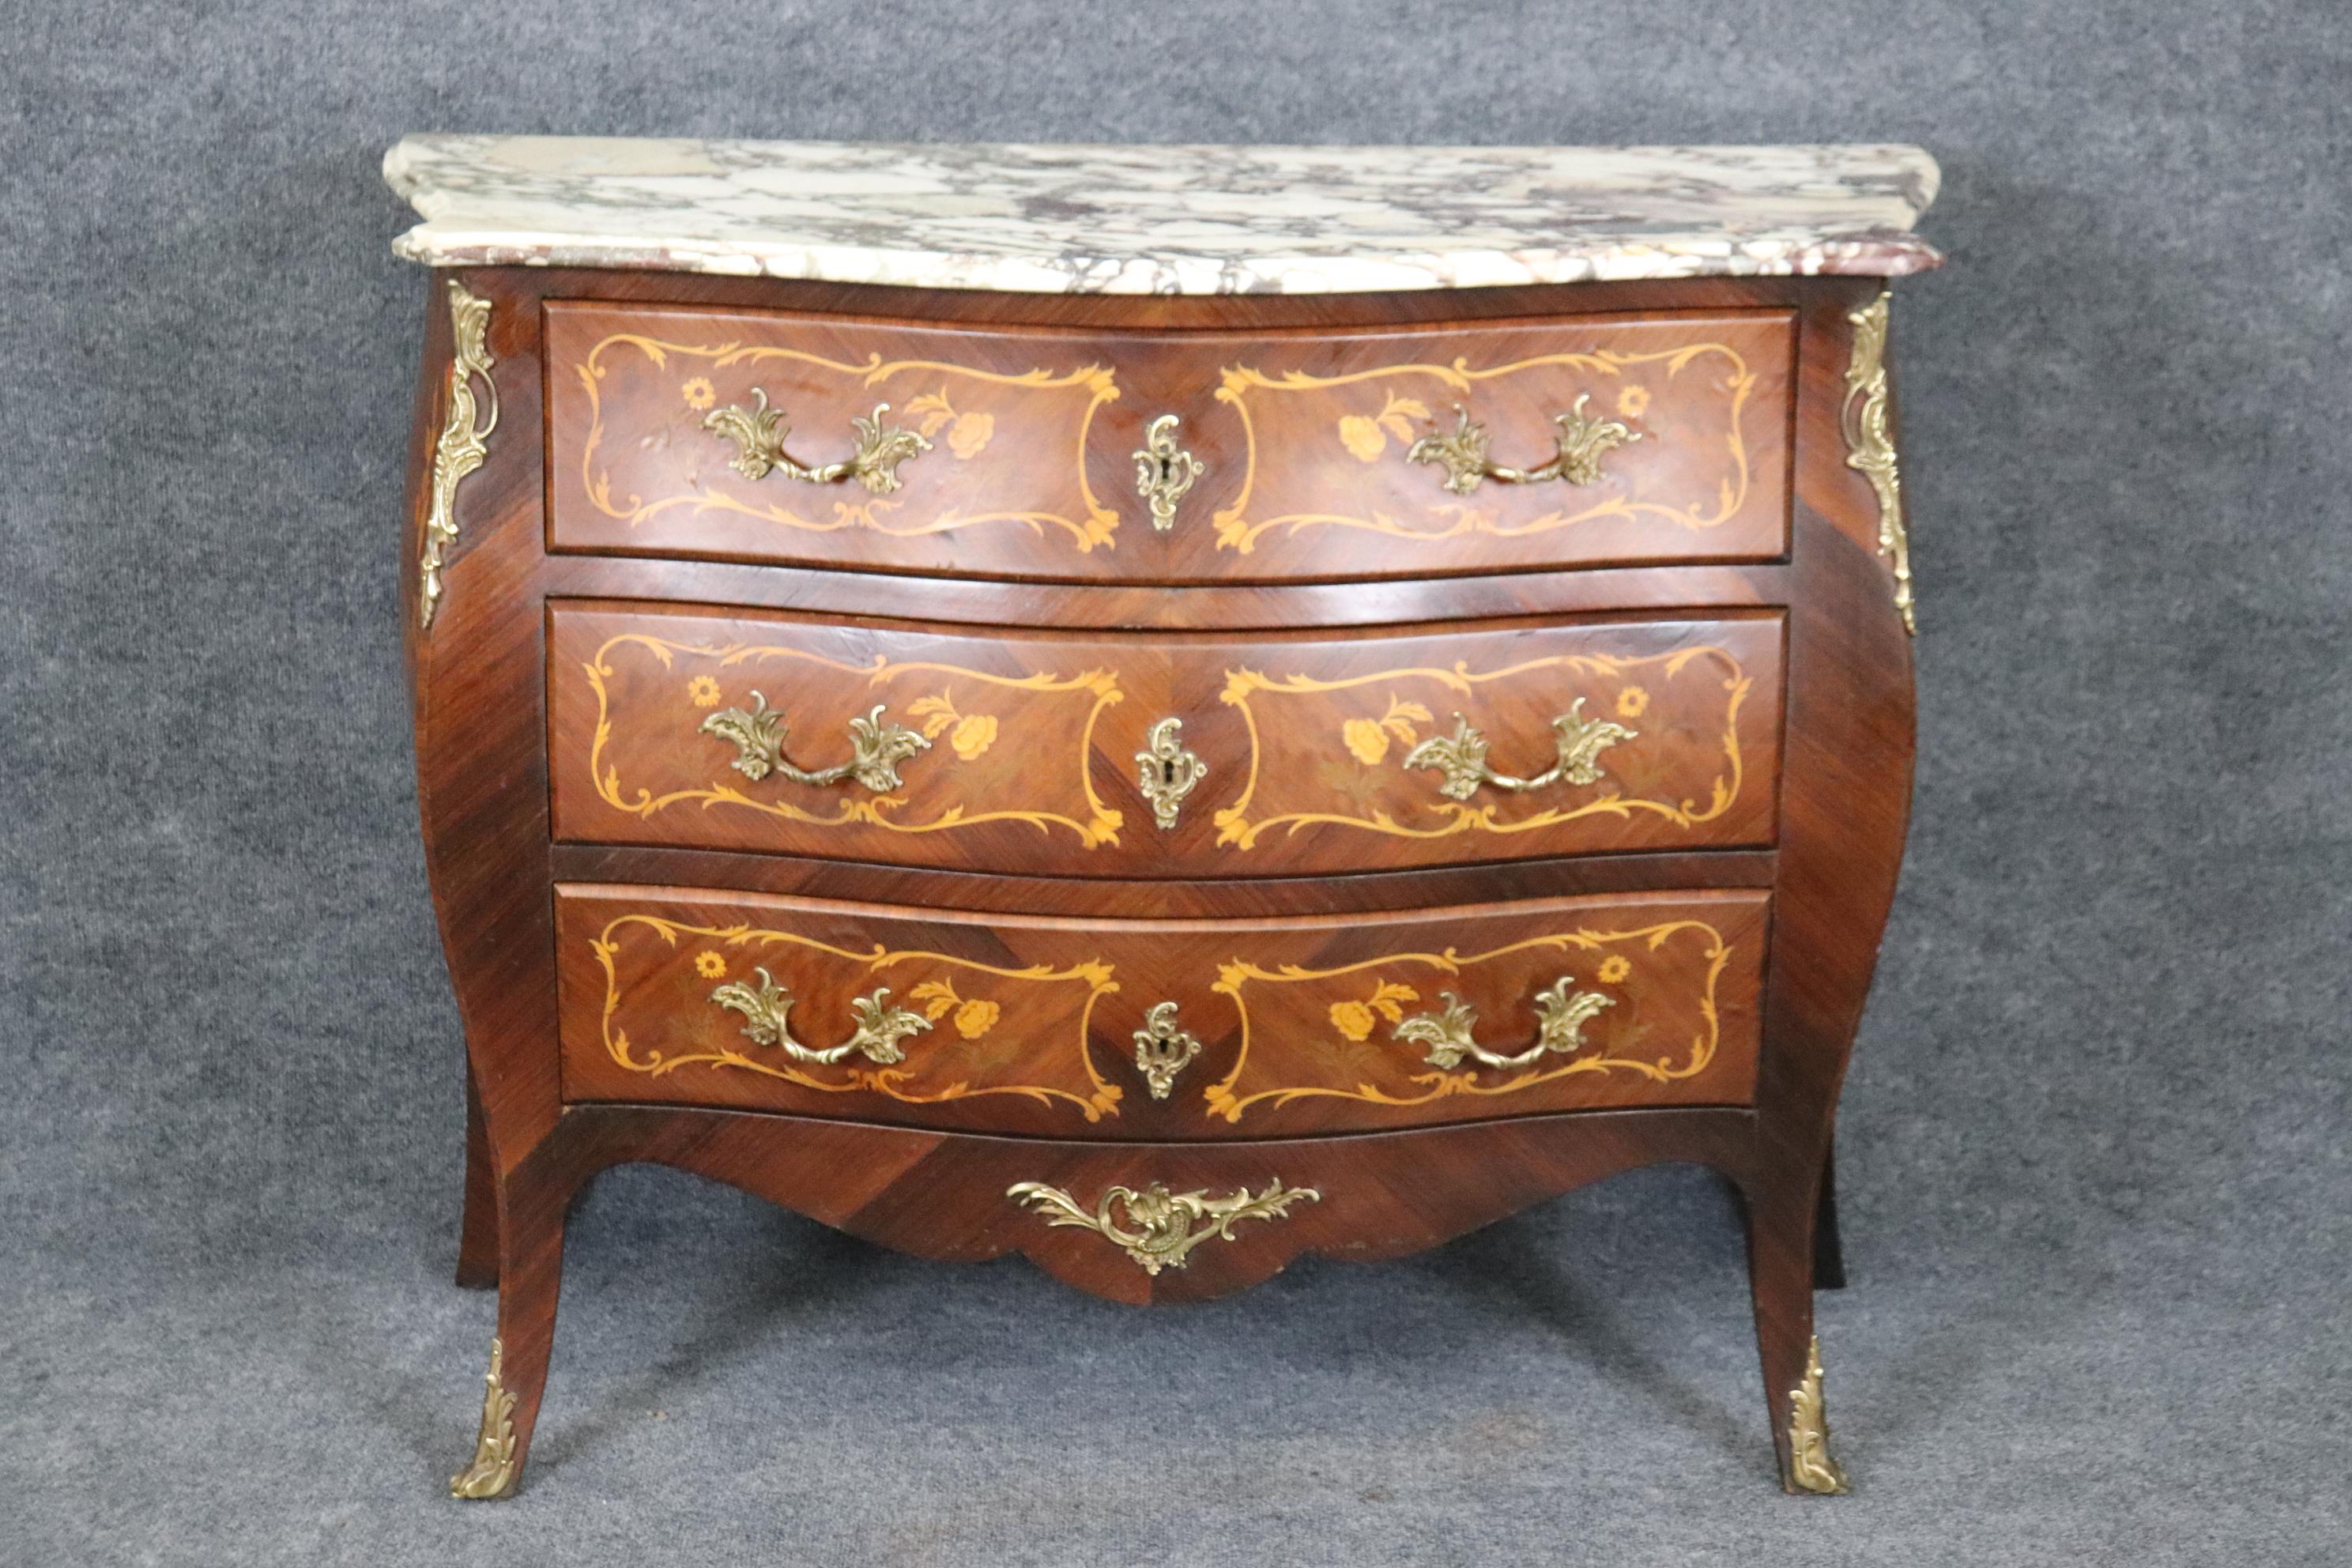 This is a gorgeous inlaid walnut and satinwood floral and bronze mounted commode. Look at the quality of the inlay and marble top. The bronze mounts are nice and crisp. Good original finish and conditon. Measures 46.25 wide x 20.25 deep x 36.5 tall.